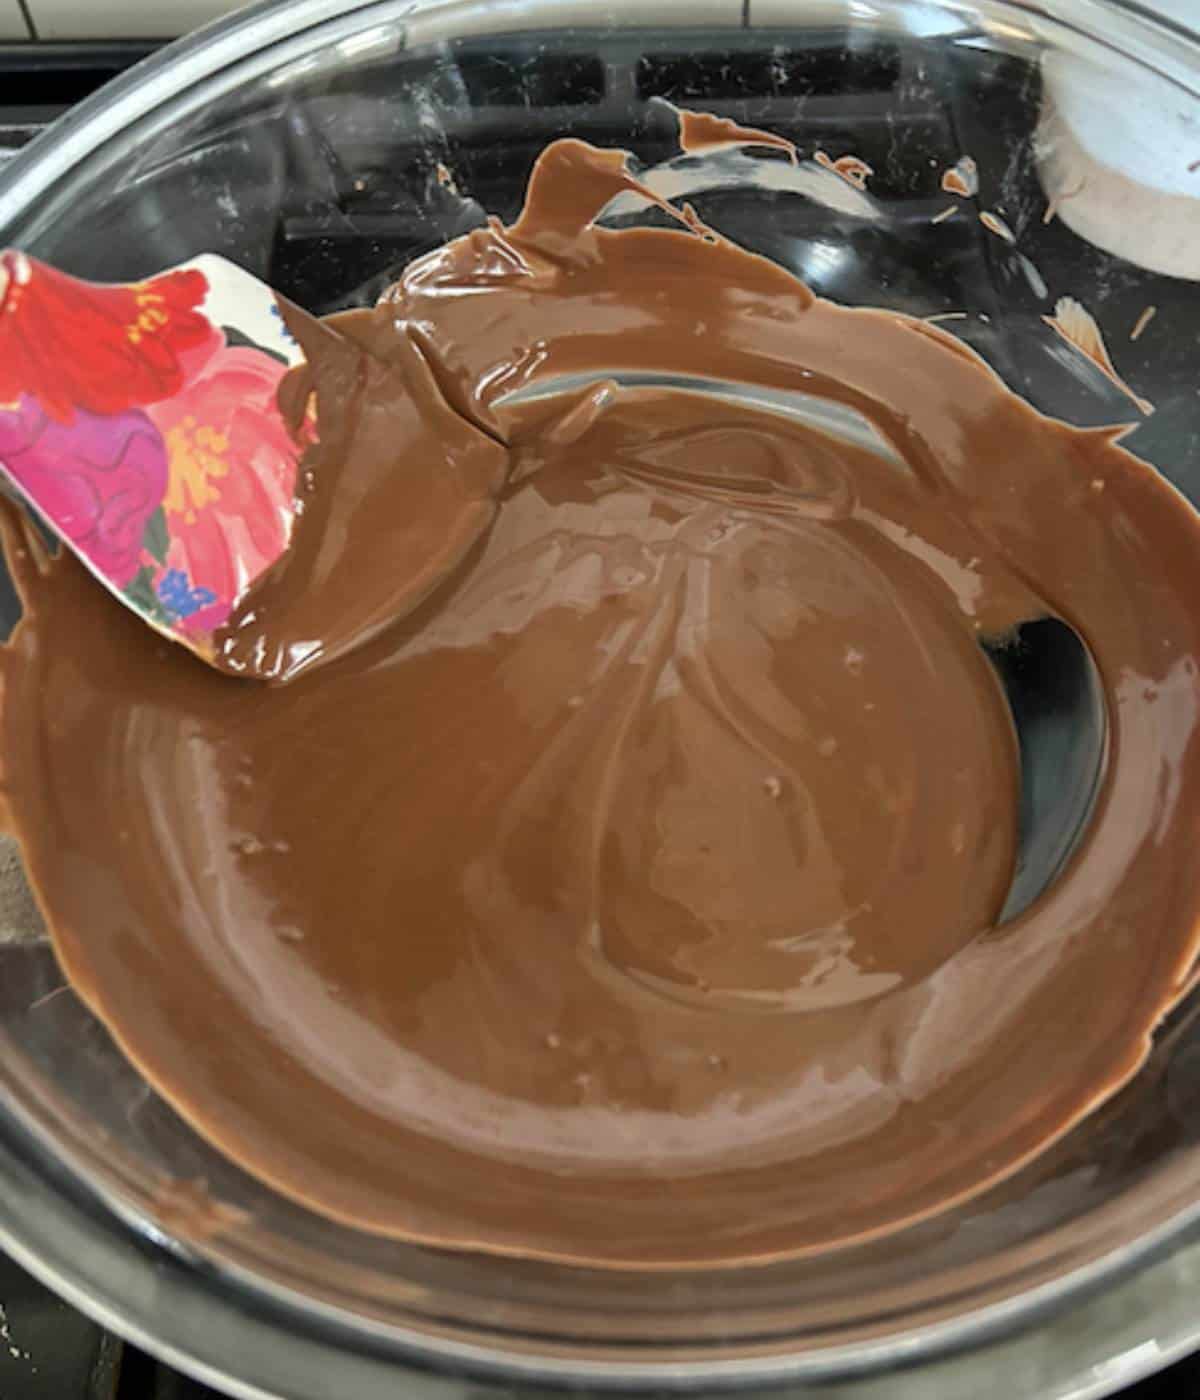 Chocolate and peanut butter melted in glass bowl.